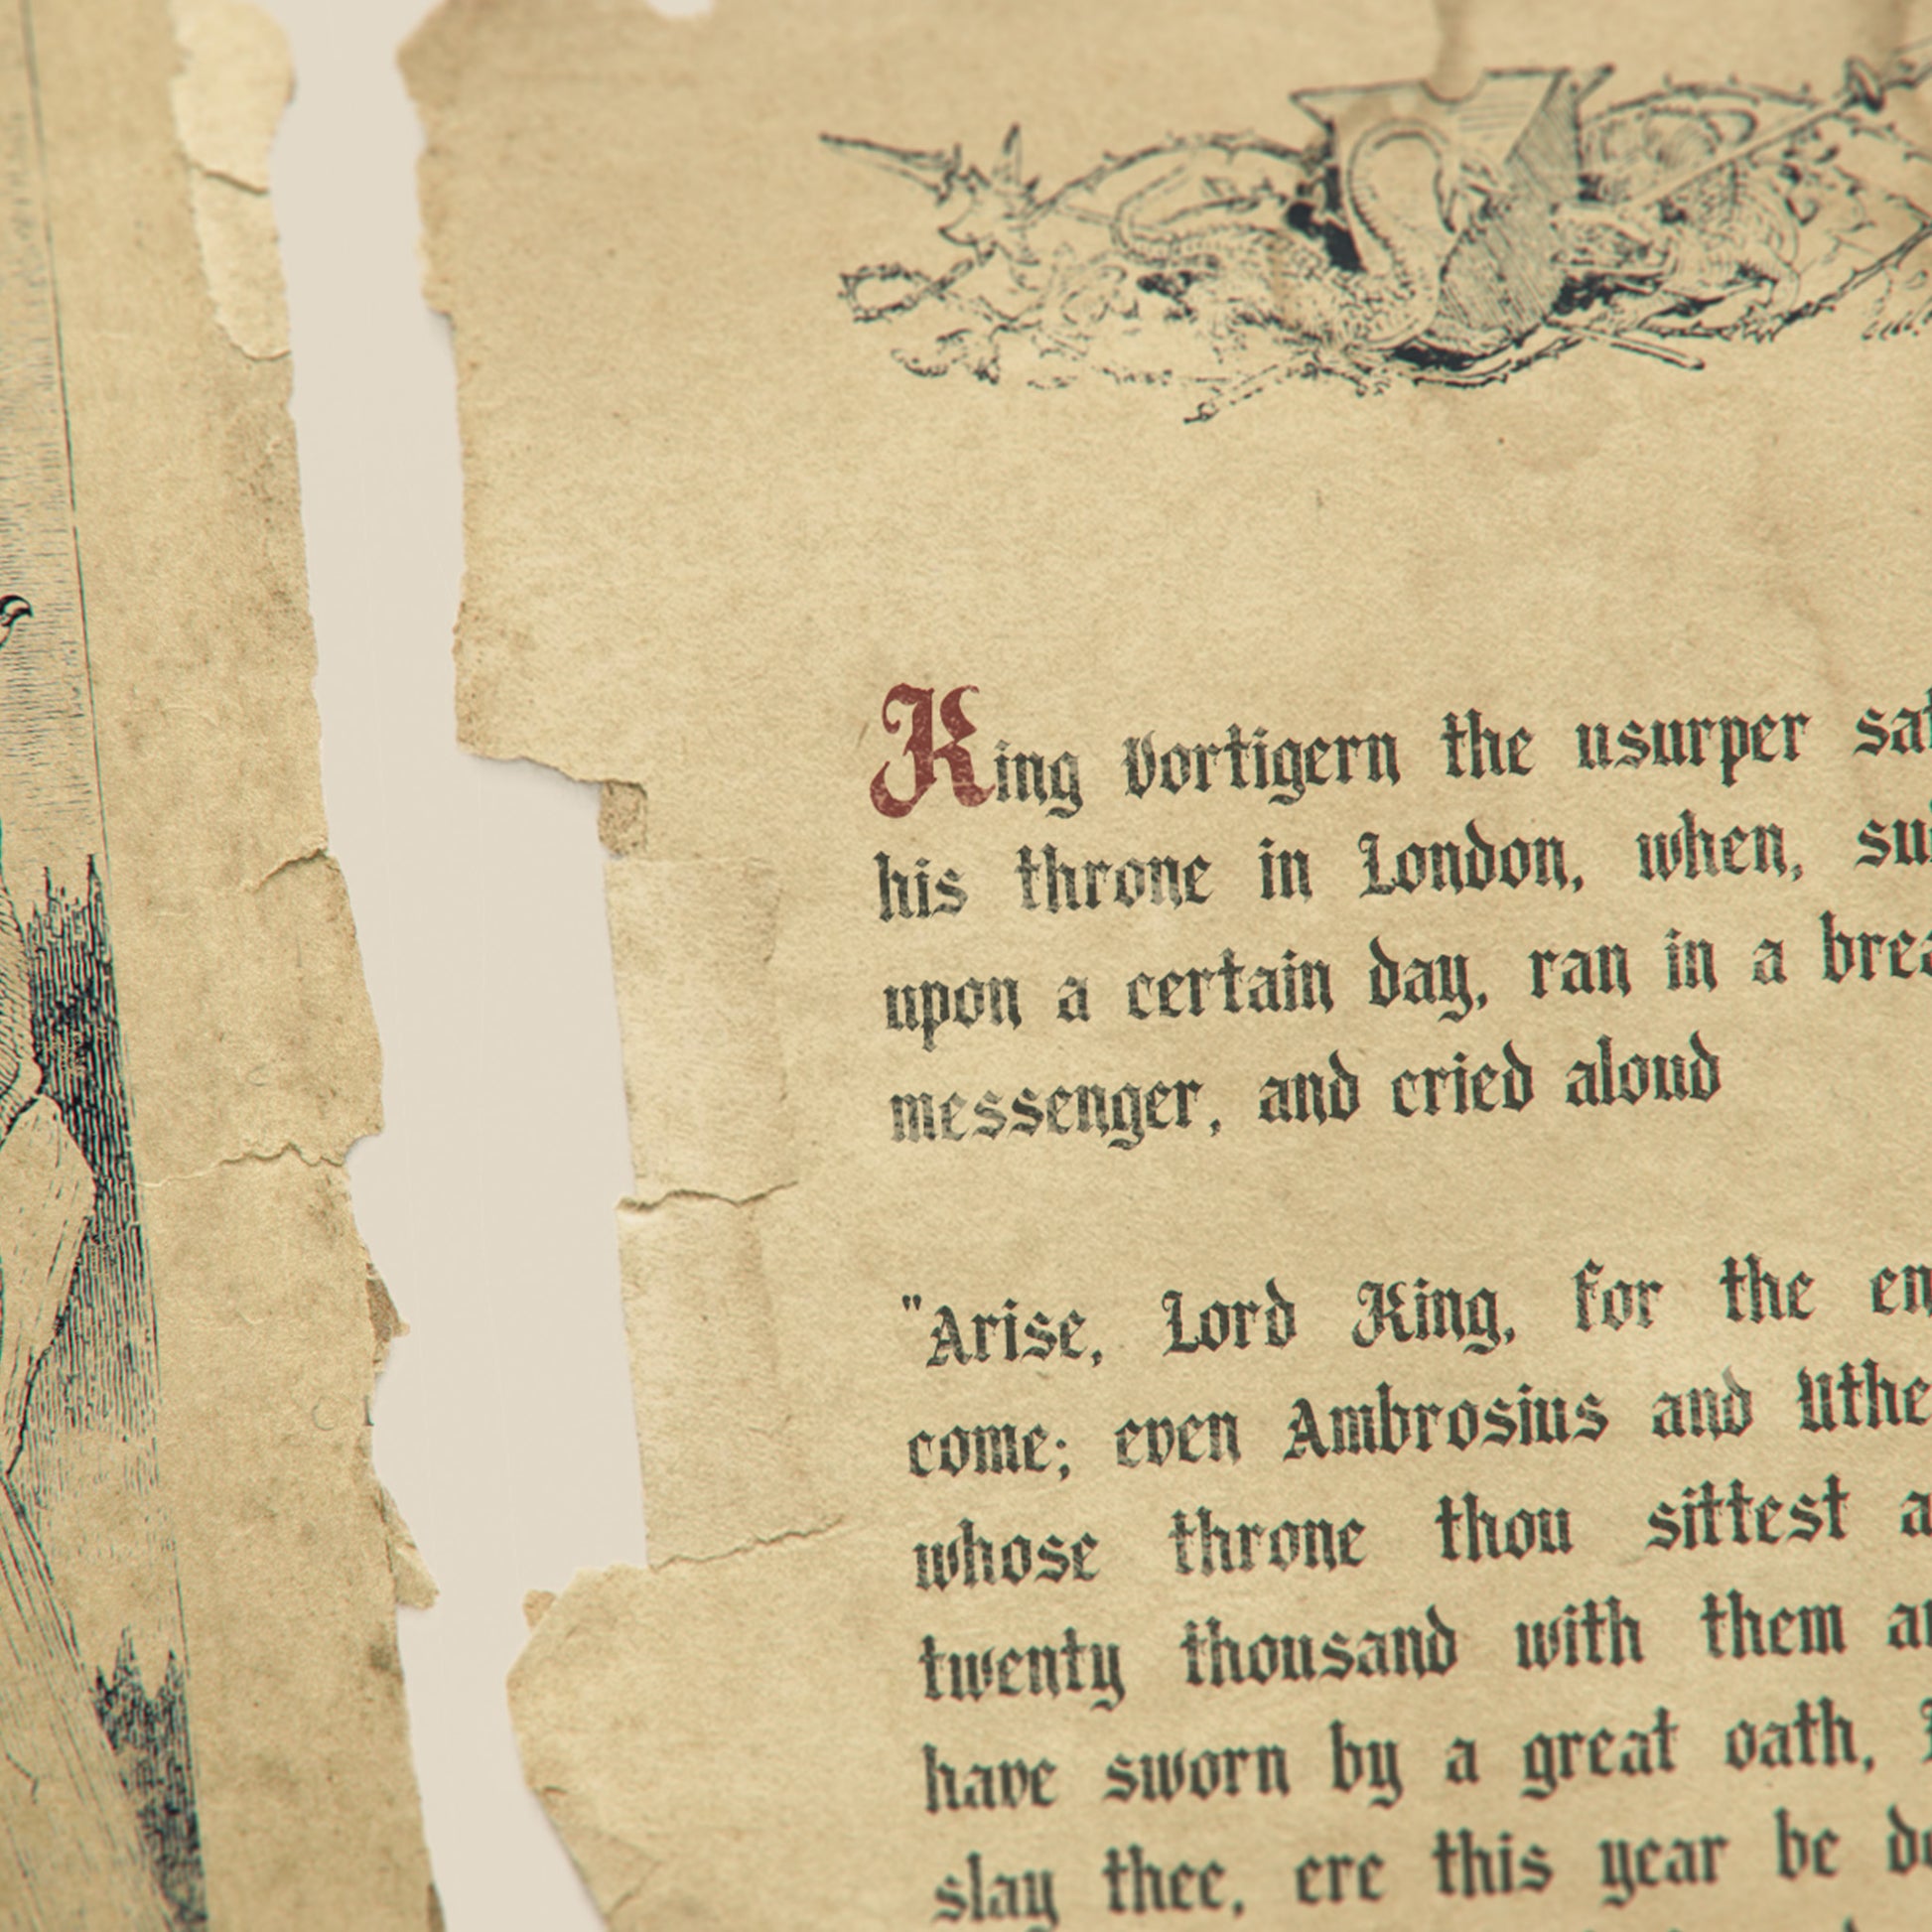 detail of an old looking manuscript, text all set in the candelabra blackletter font